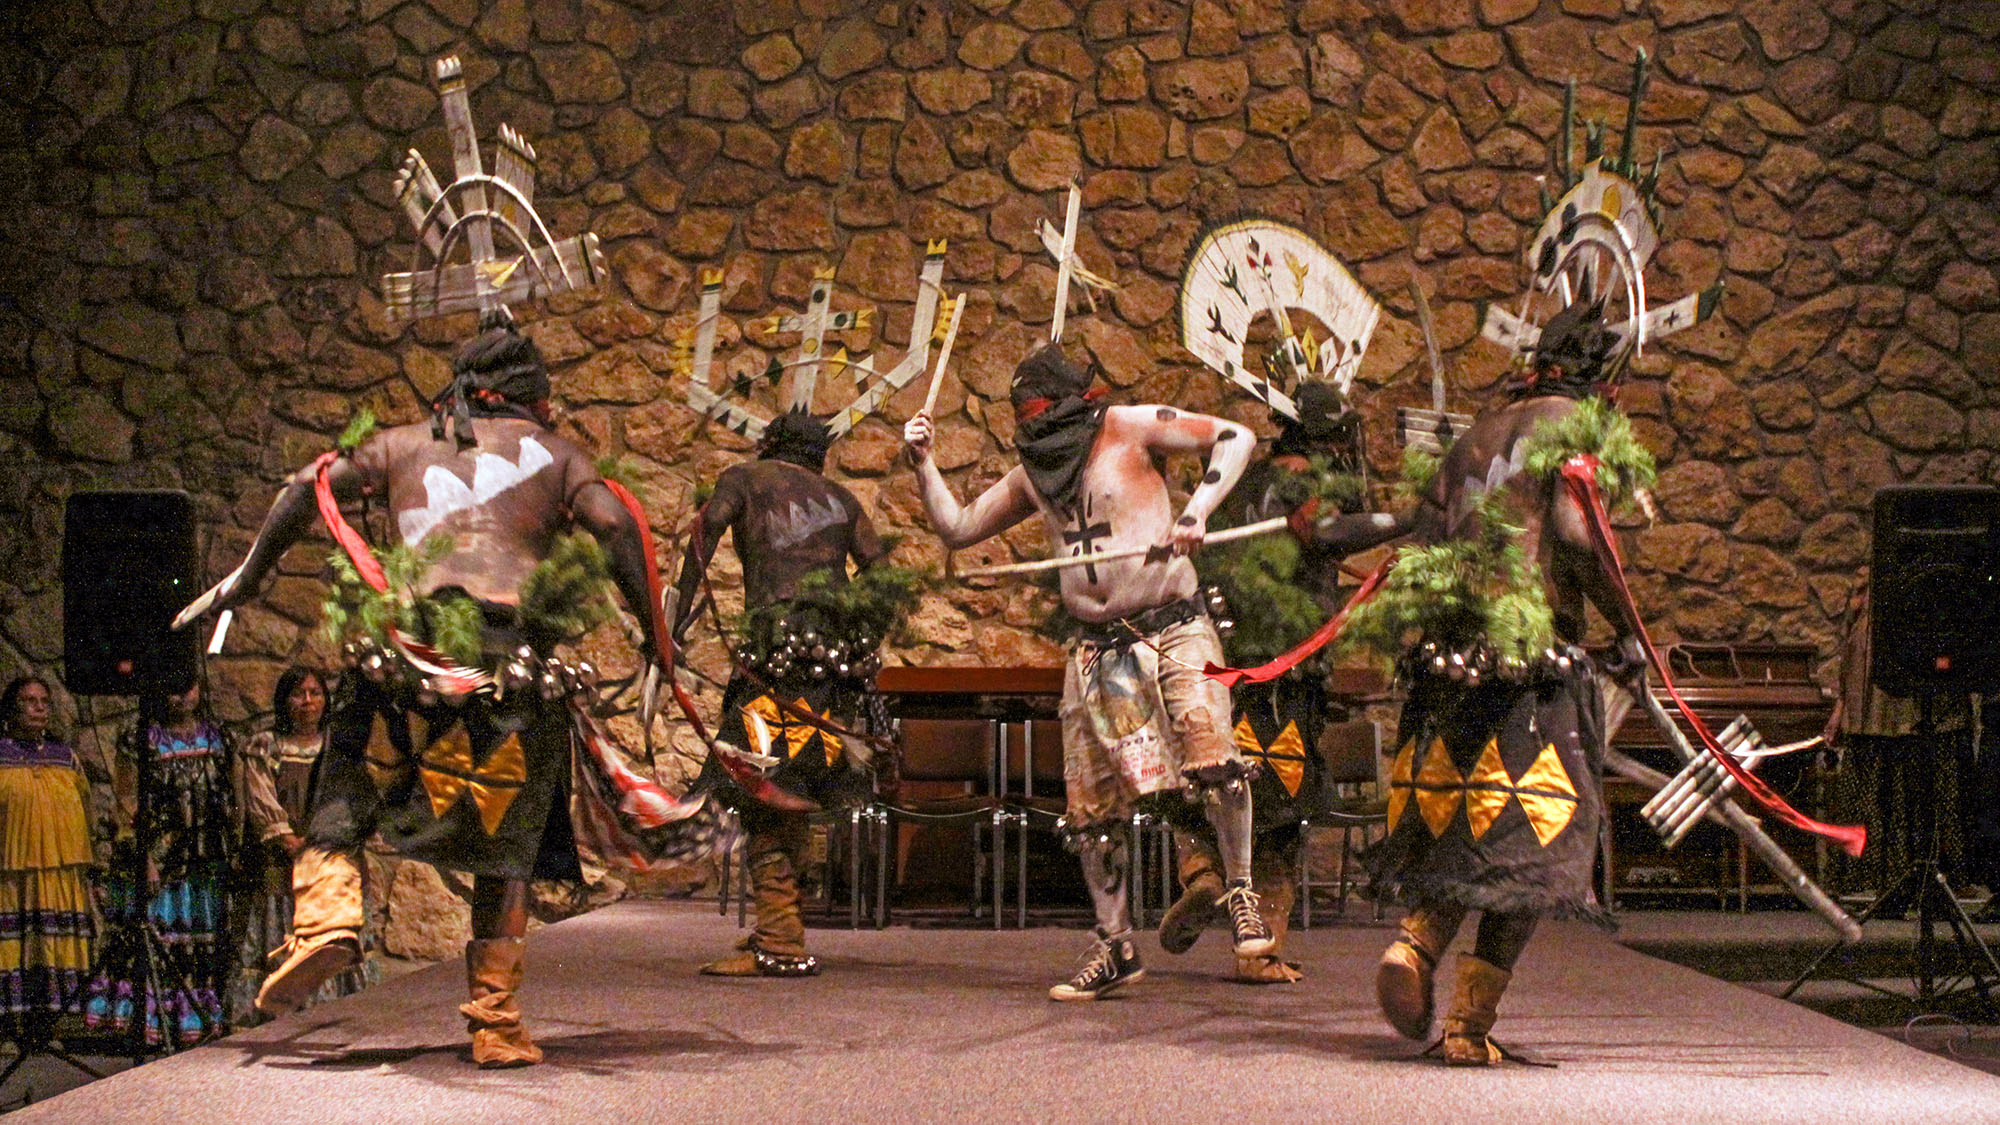 Five male Apache dancers, with designs painted on their torsos, and wearing elaborate wooden crowns, are performing on a stage in a community hall.